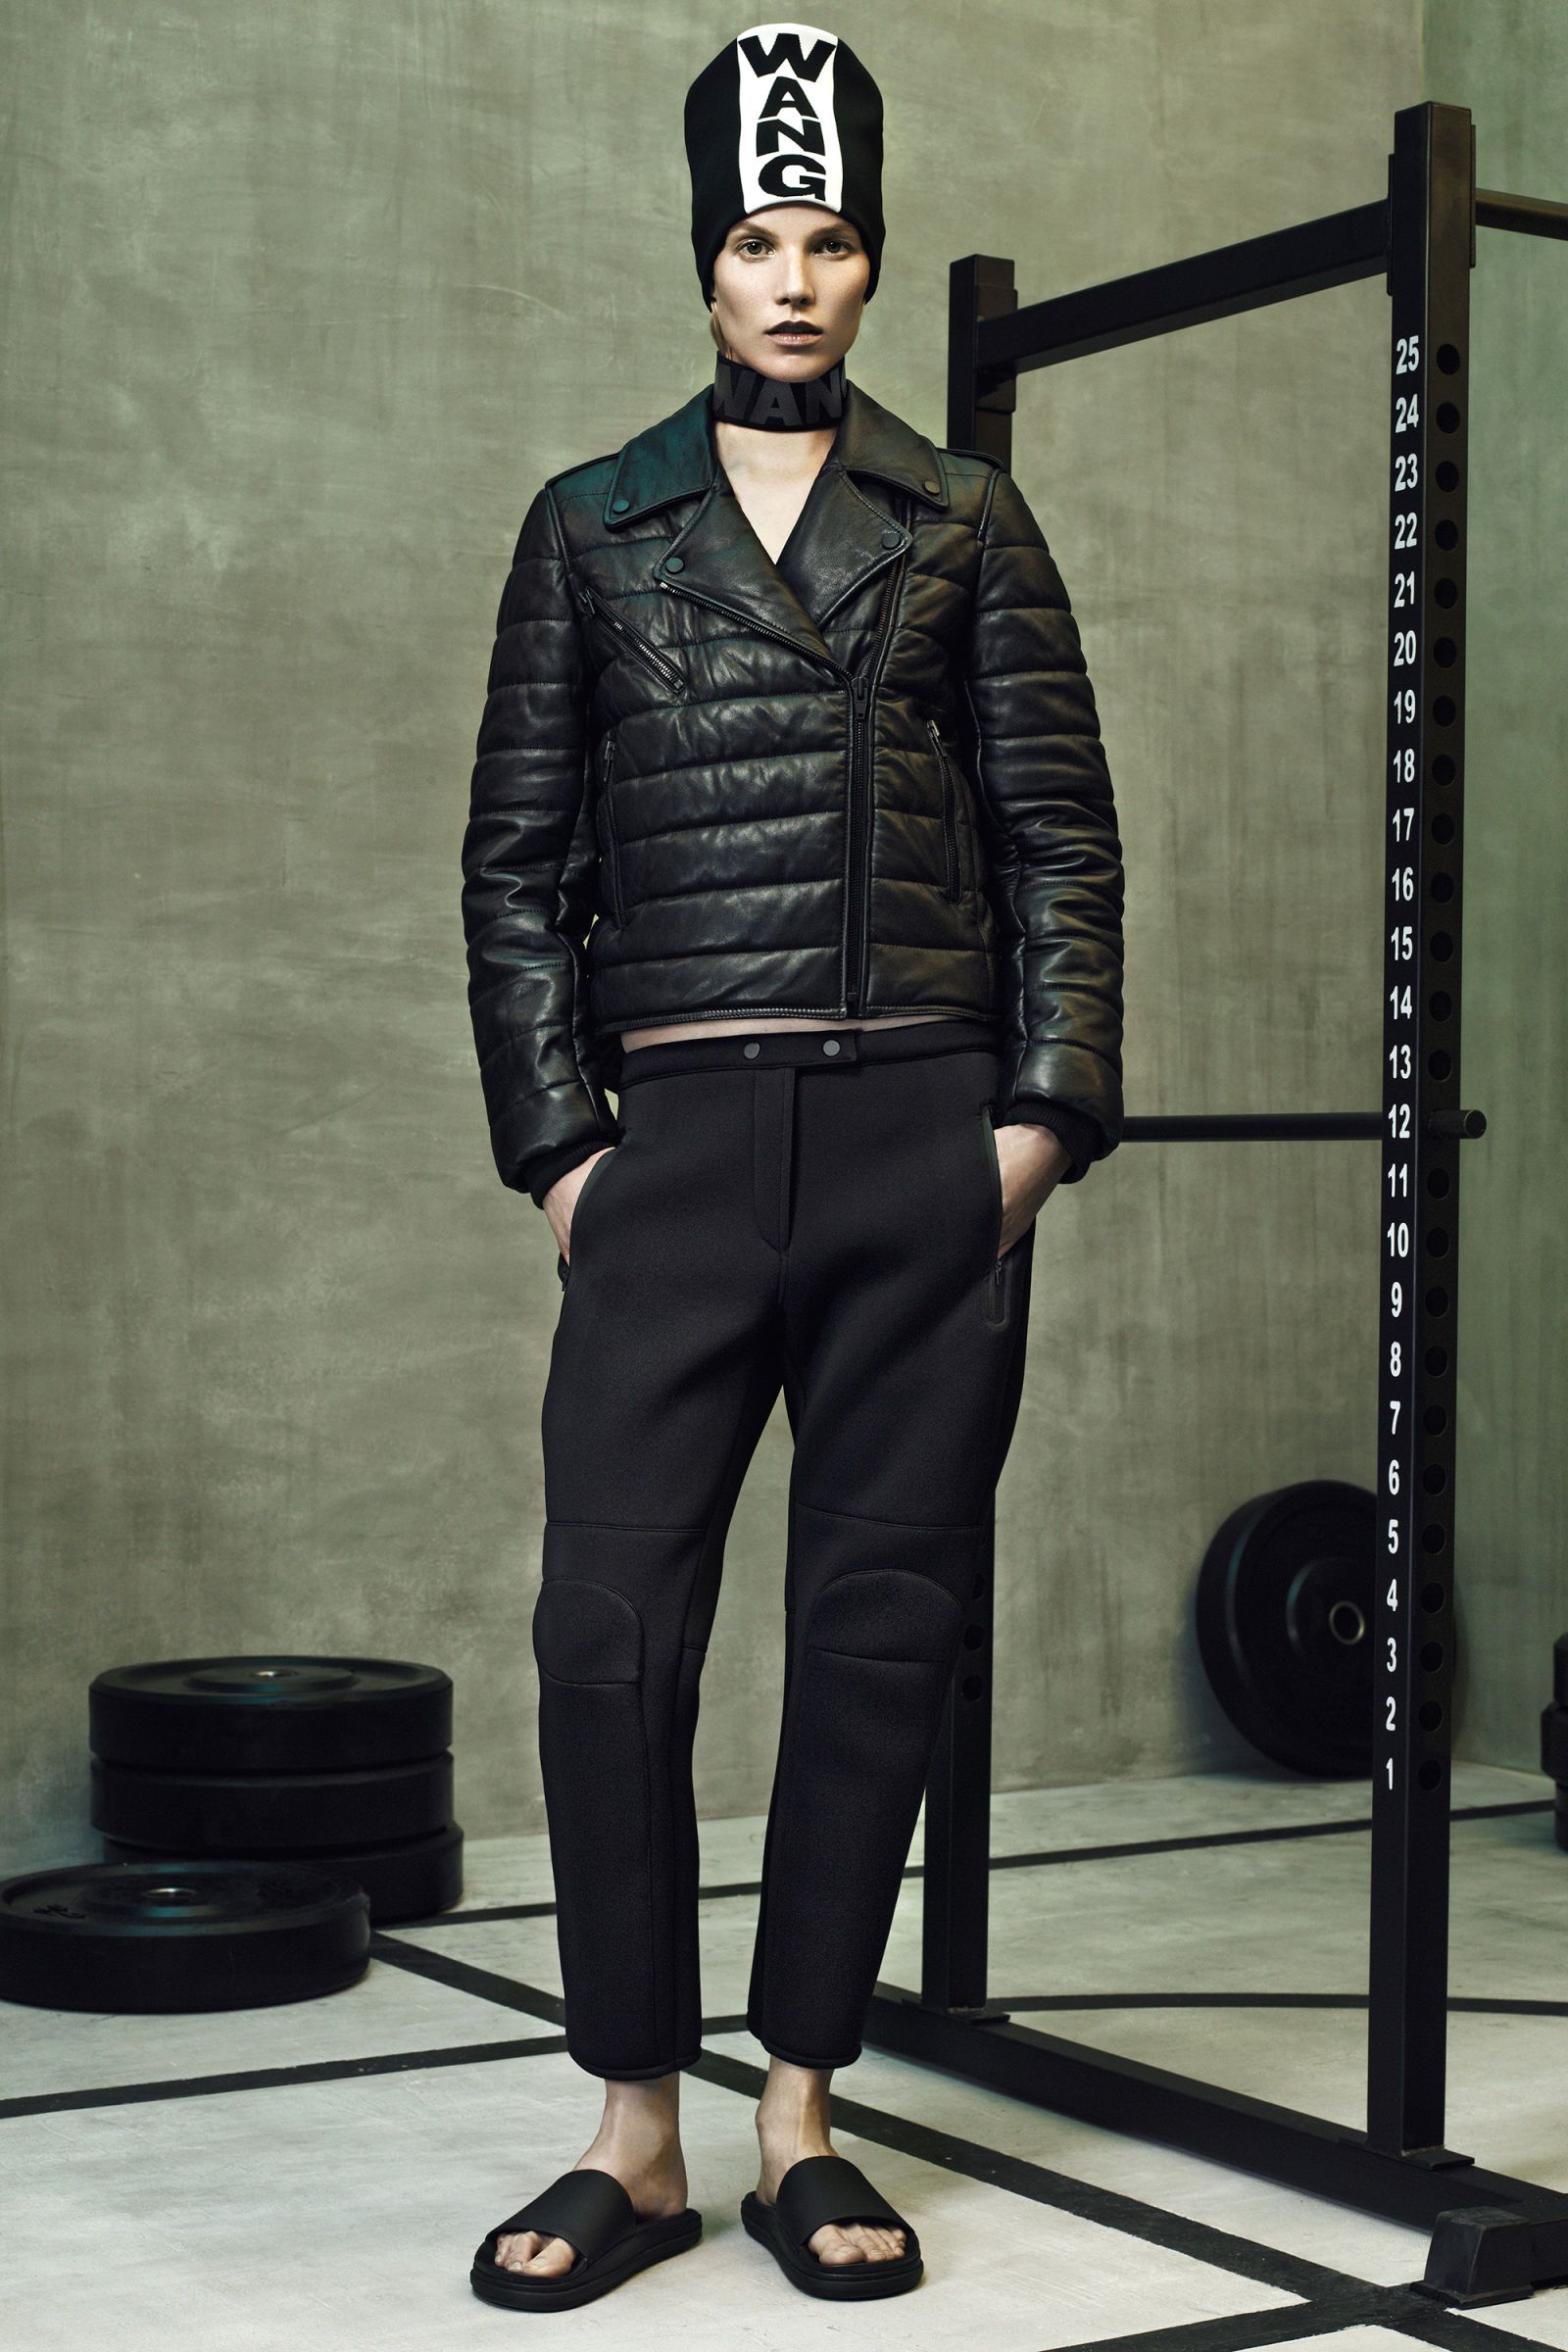 The Full Alexander Wang X H M Lookbook Alexander Wang For H M Collection